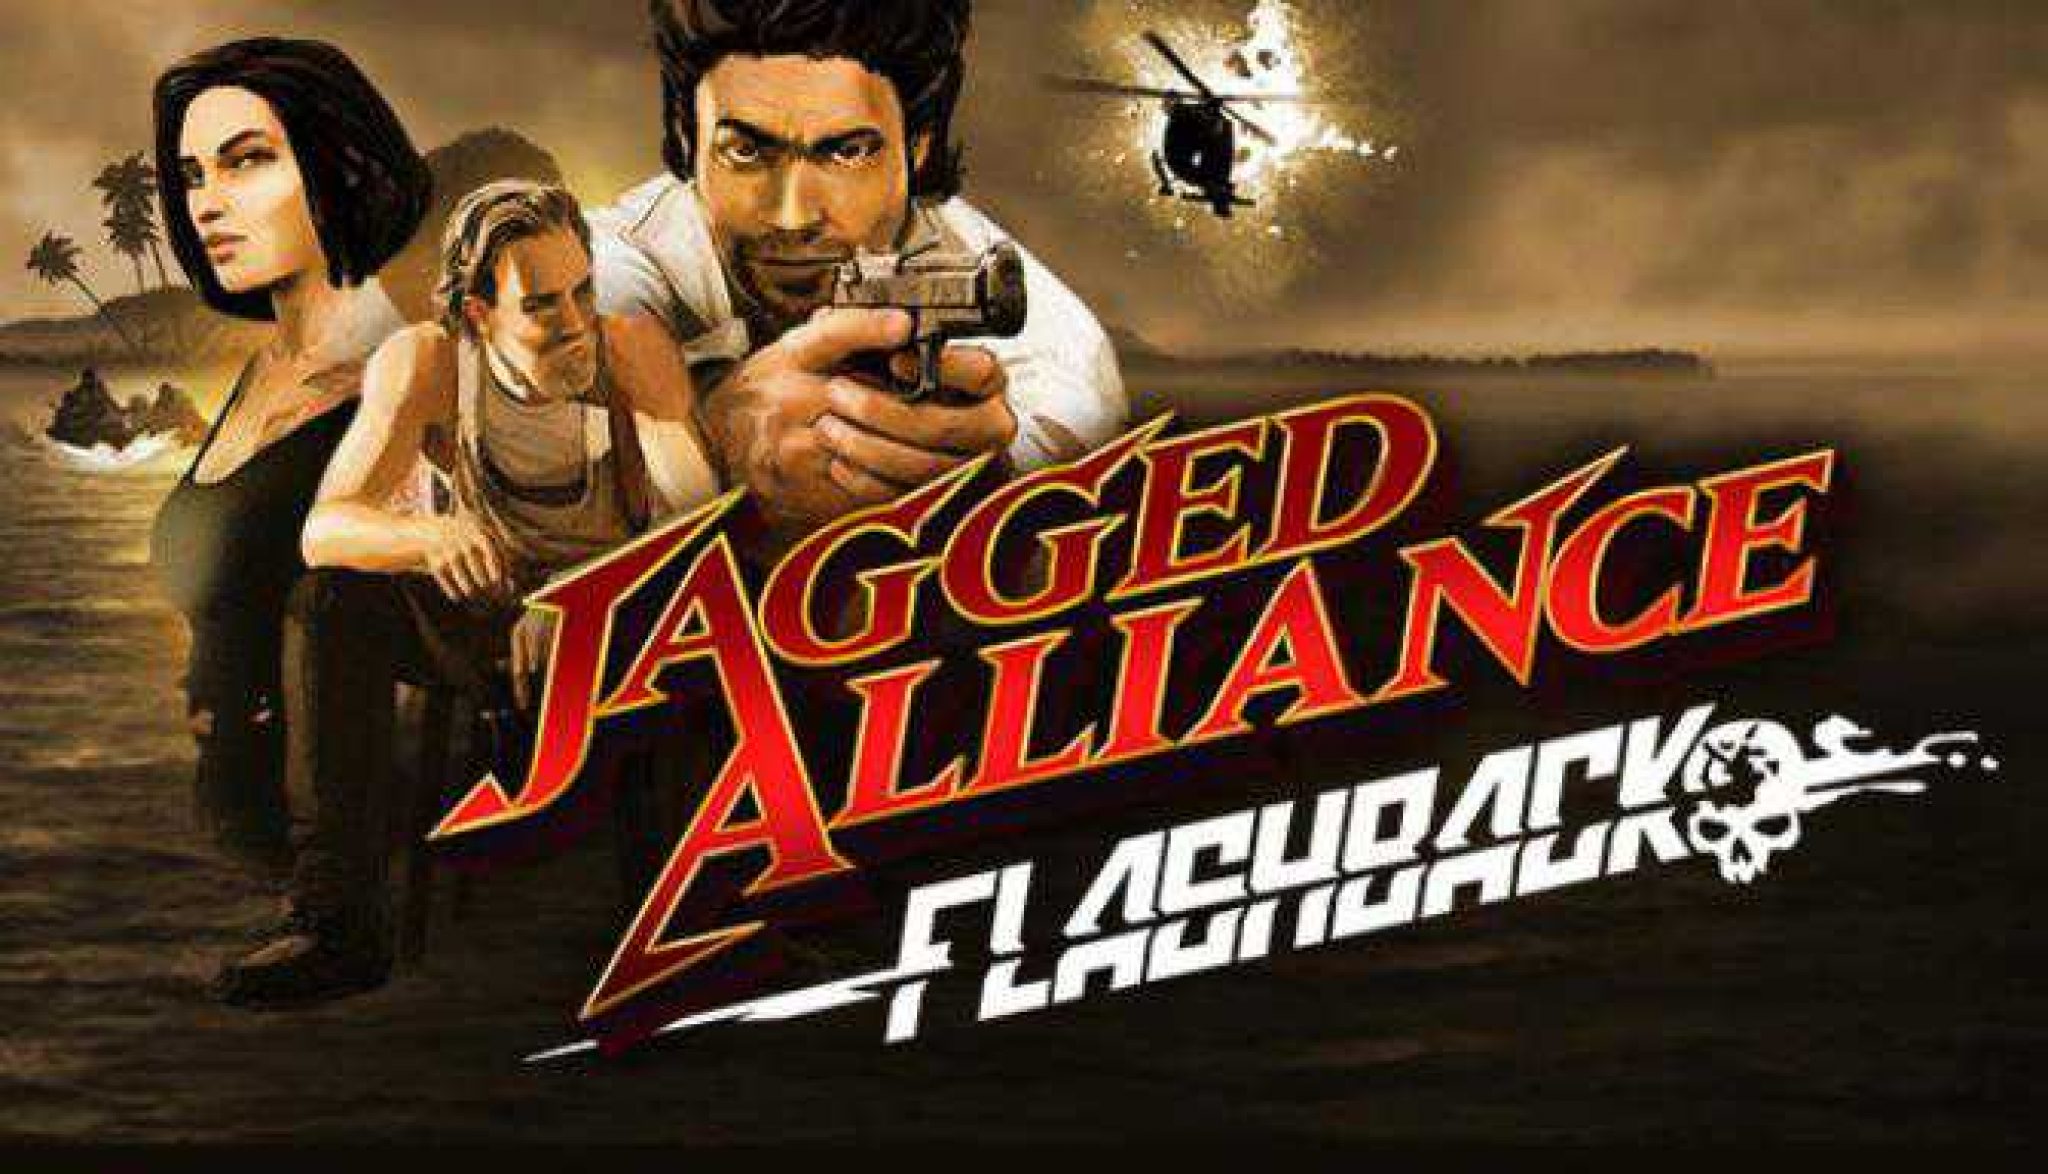 download jagged 3